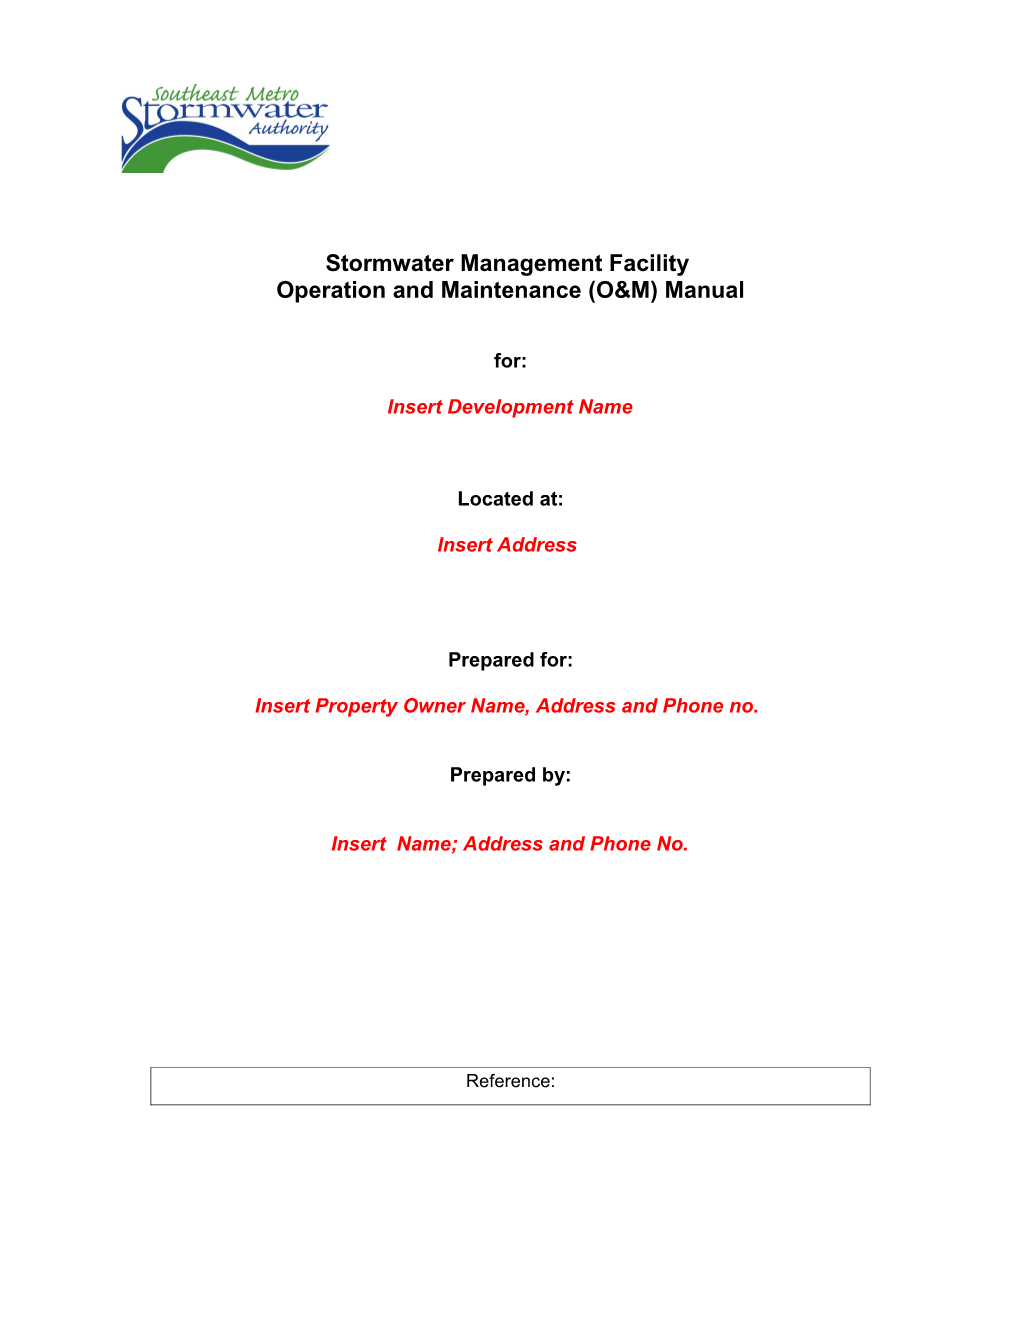 Stormwater Management Facility Operation and Maintenance Guidance Document